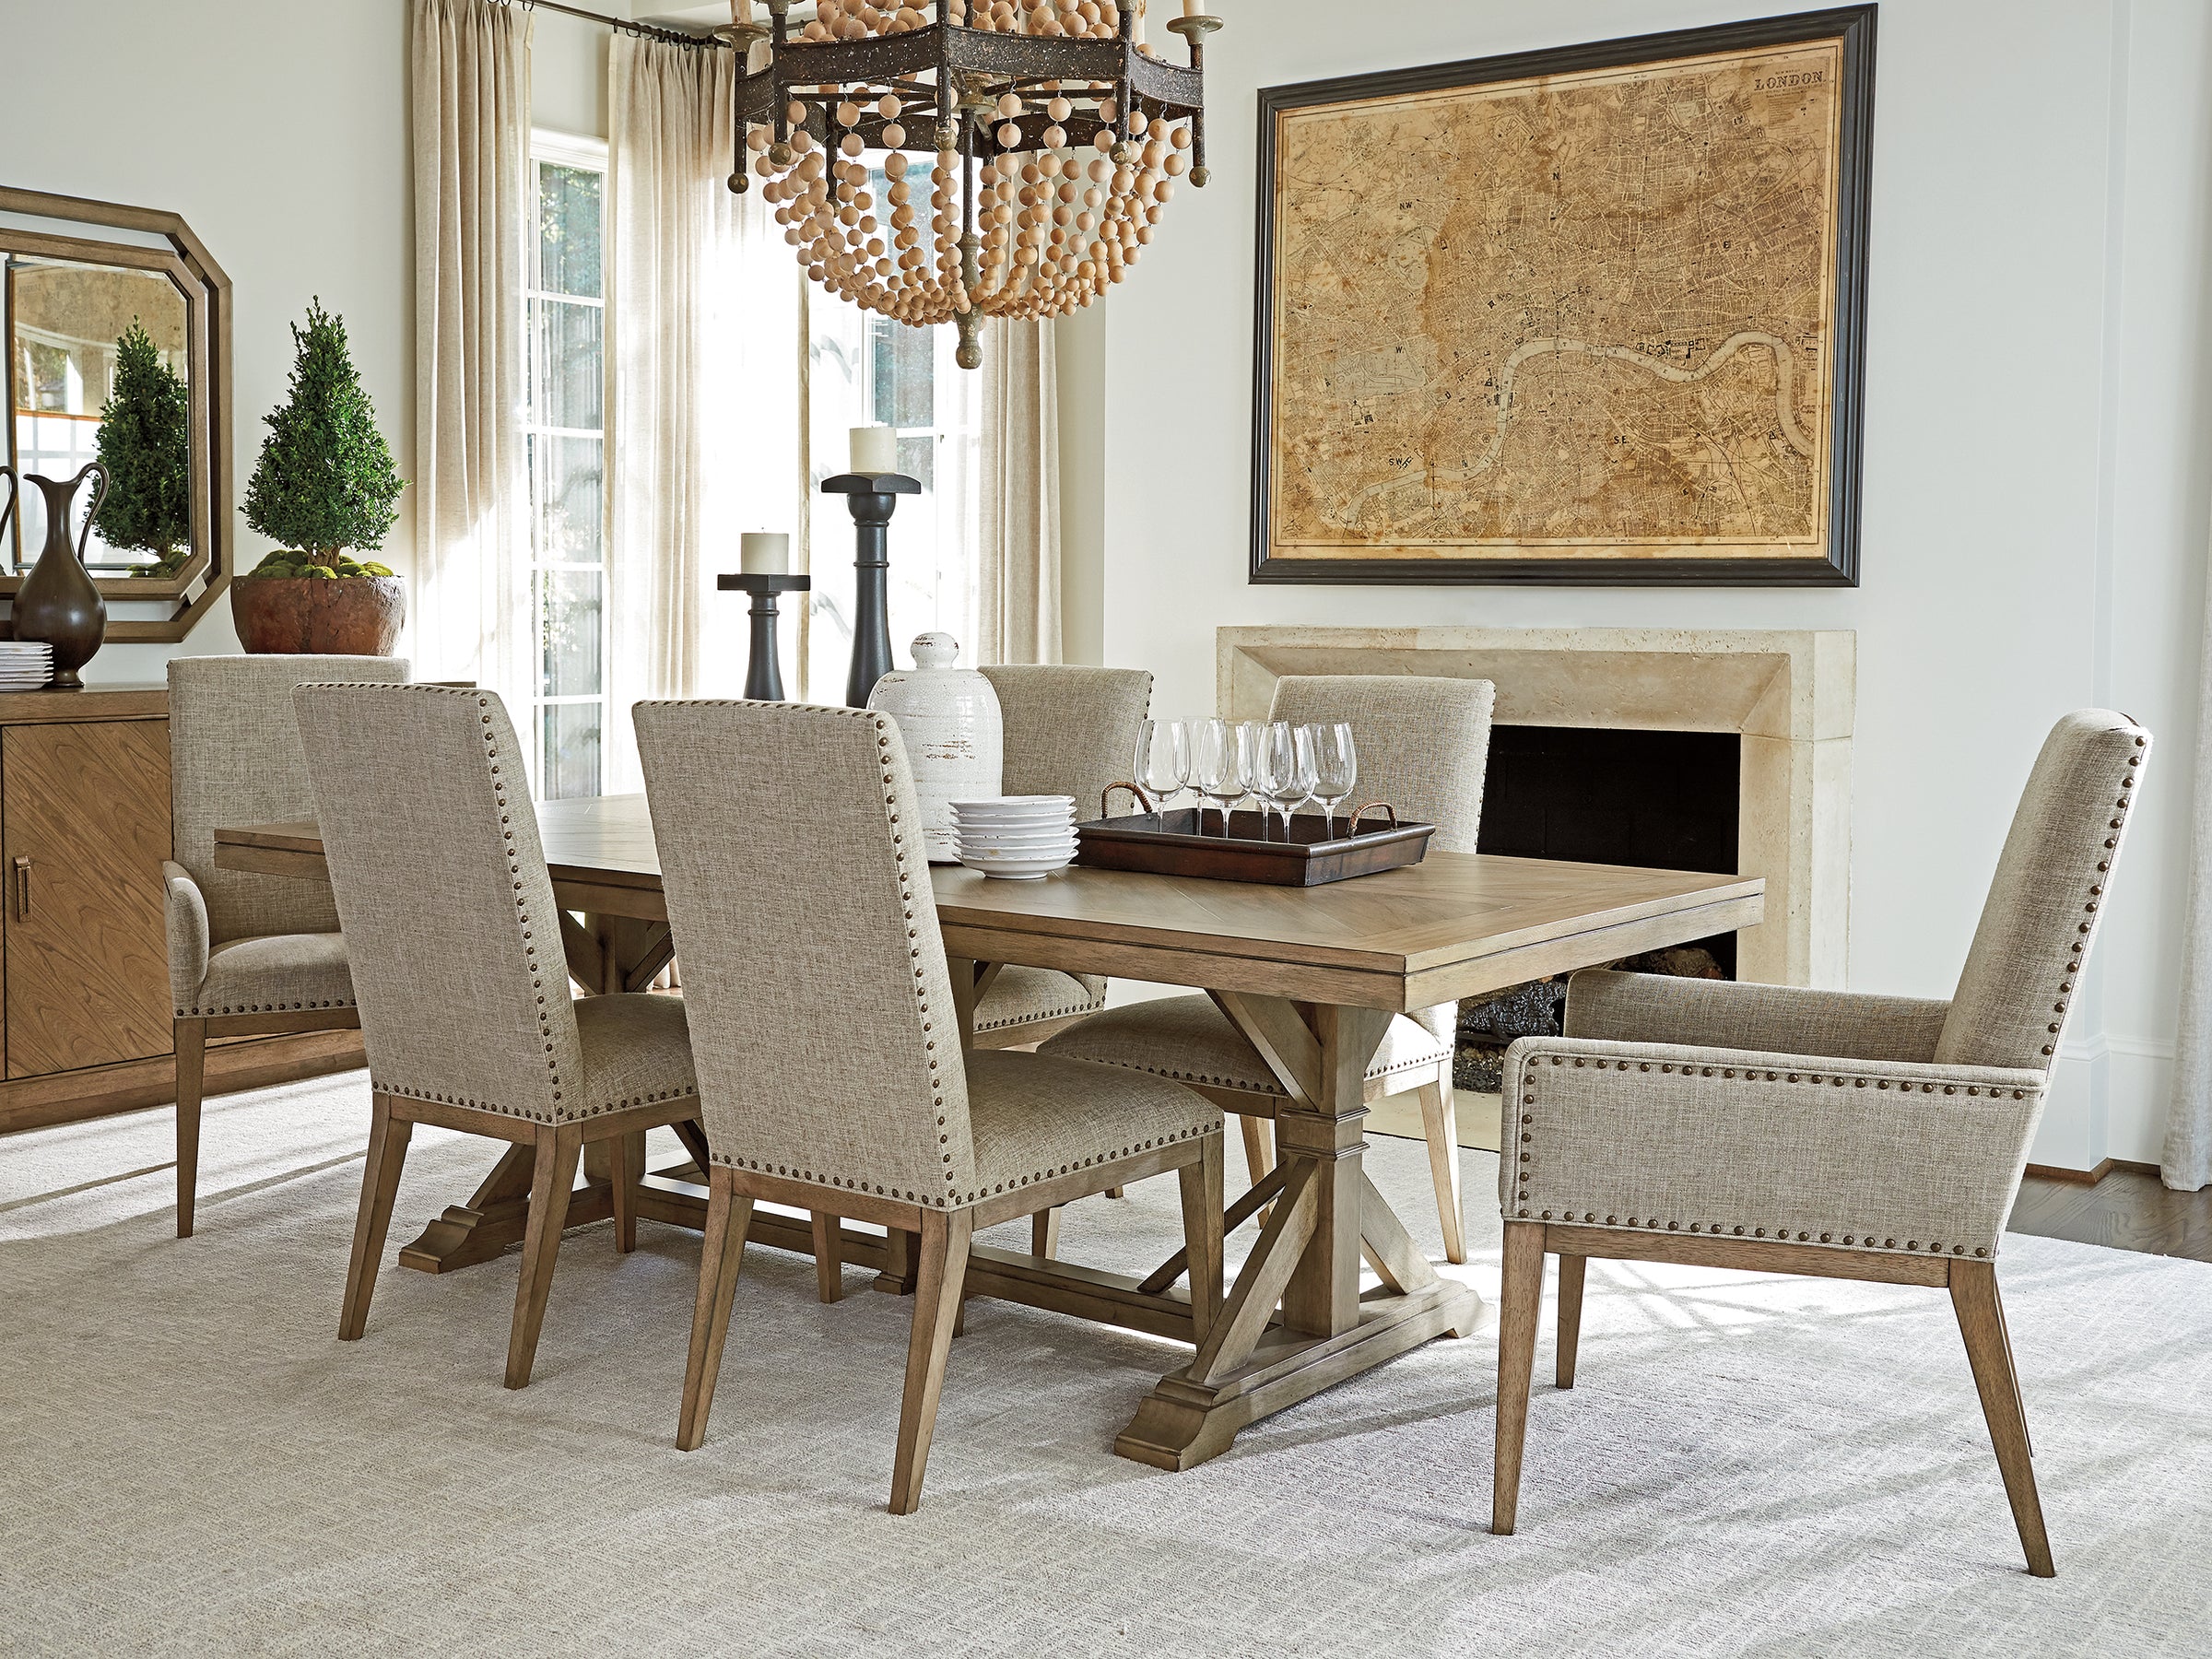 Dining room scene from Tommy Bahama Home's Cypress Point collection featuring a tan wood dining table surrounded by matching fabric and wood dining chairs.